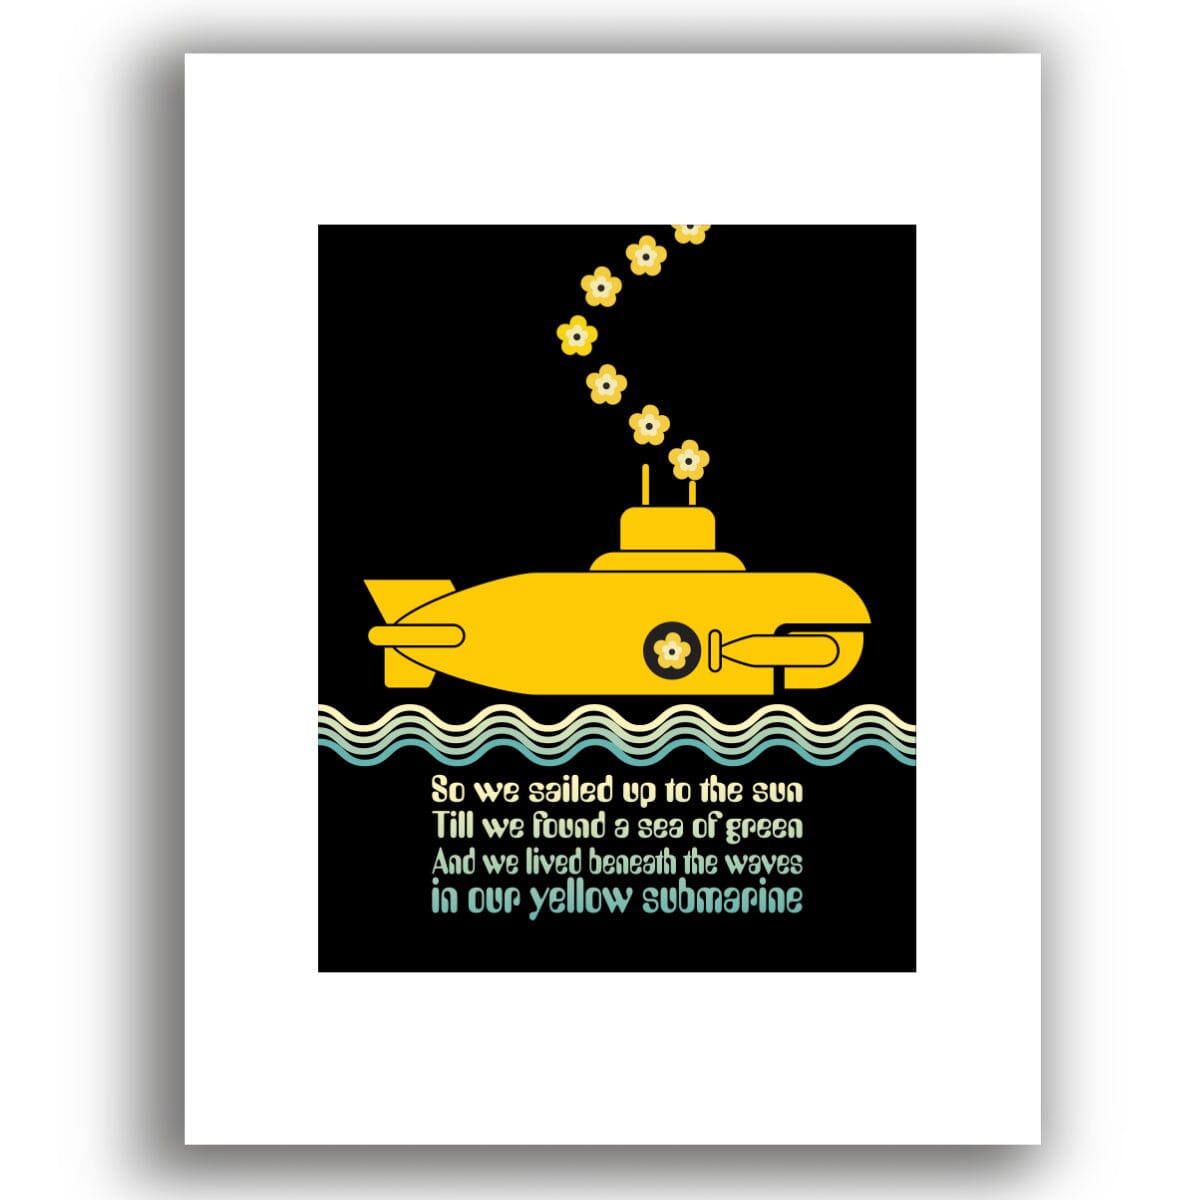 Yellow Submarine by the Beatles - Print Song Lyric Music Art Song Lyrics Art Song Lyrics Art 11x14 White Matted Print 